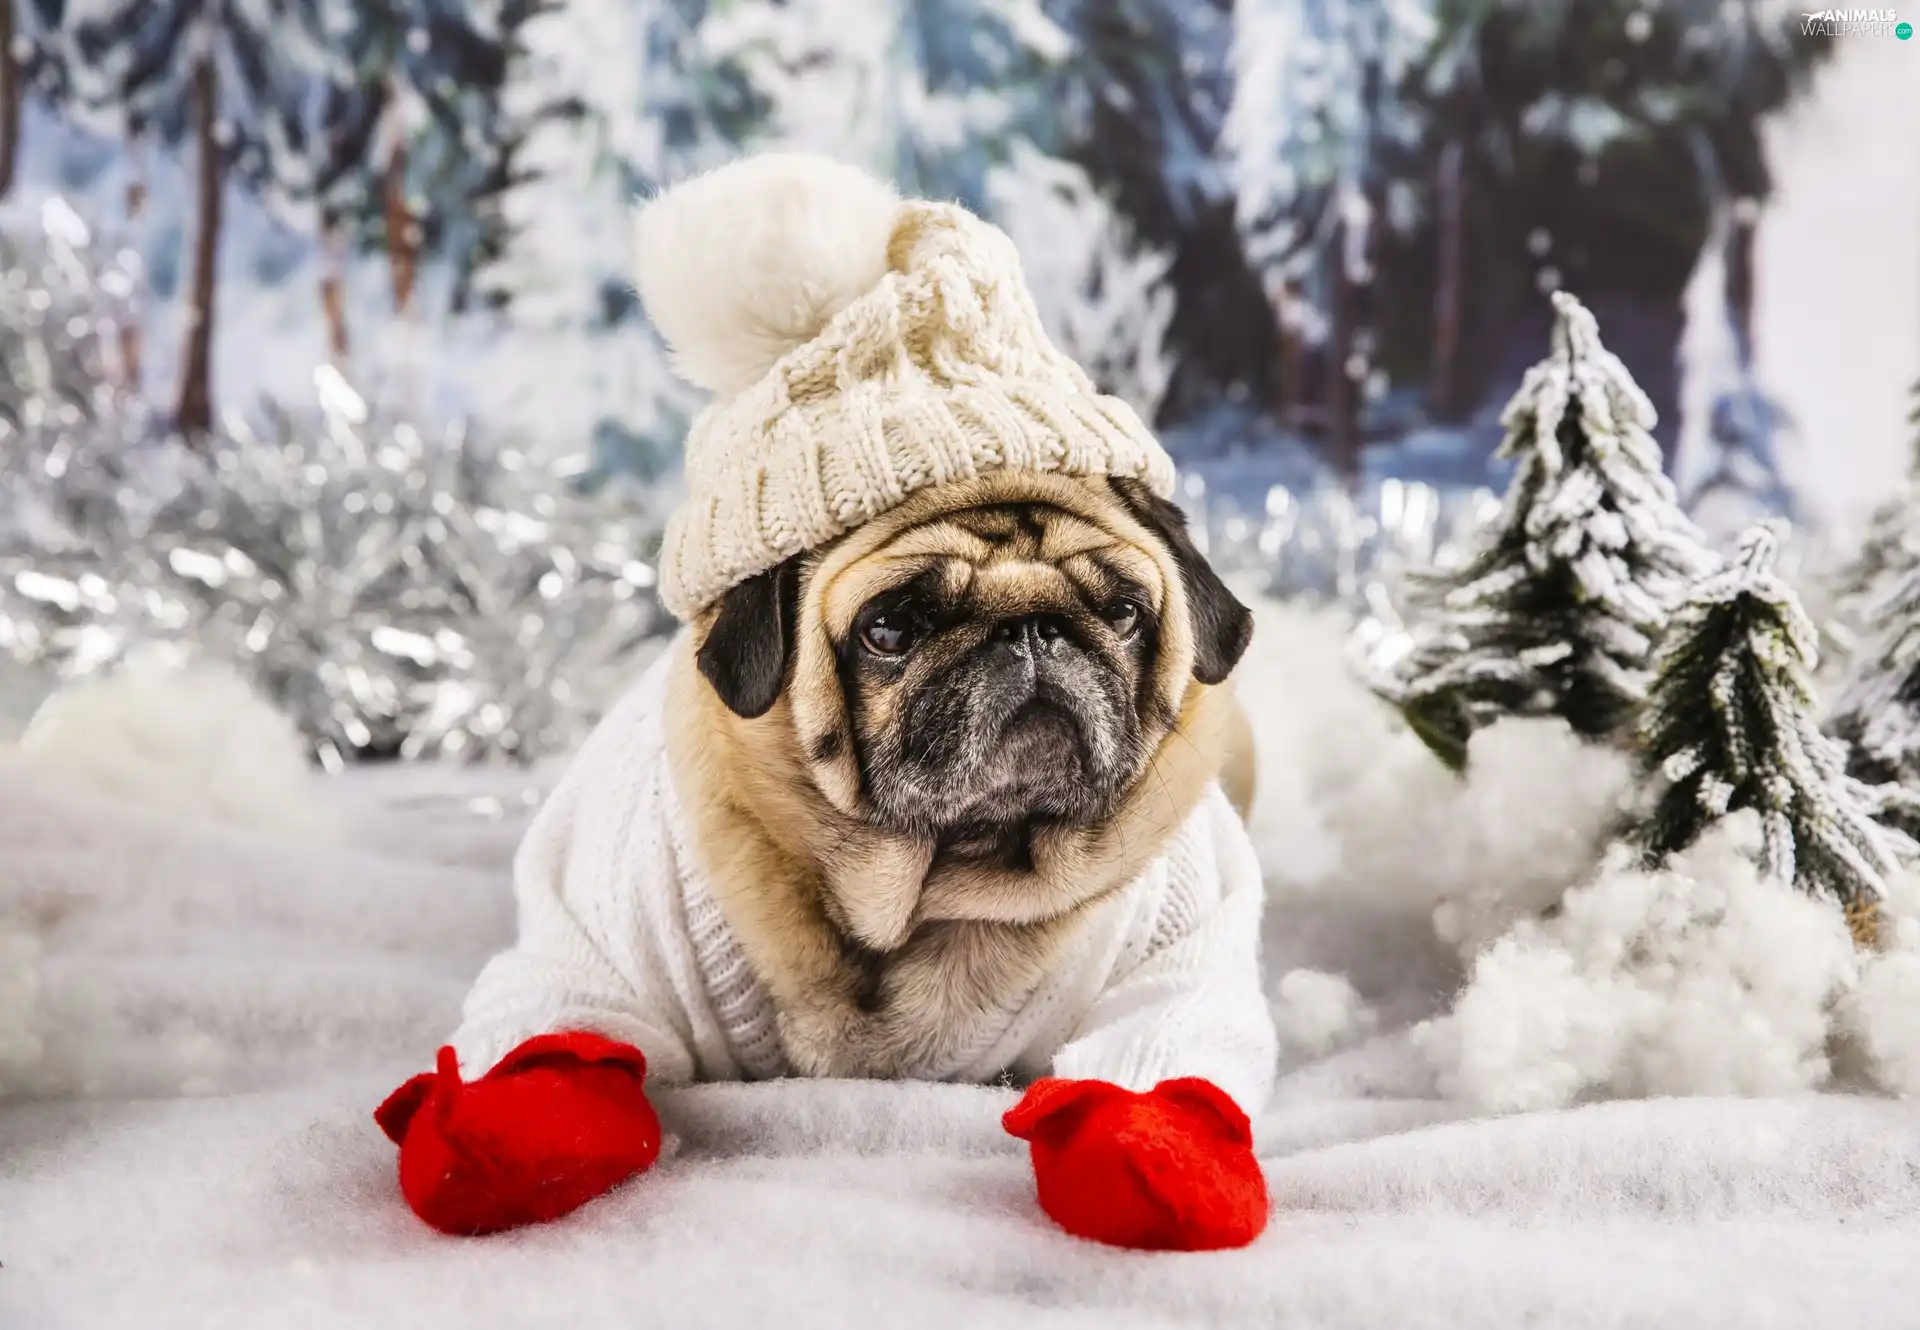 Gloves, pug, Hat, viewes, sweater, dog, White, winter, trees, Red